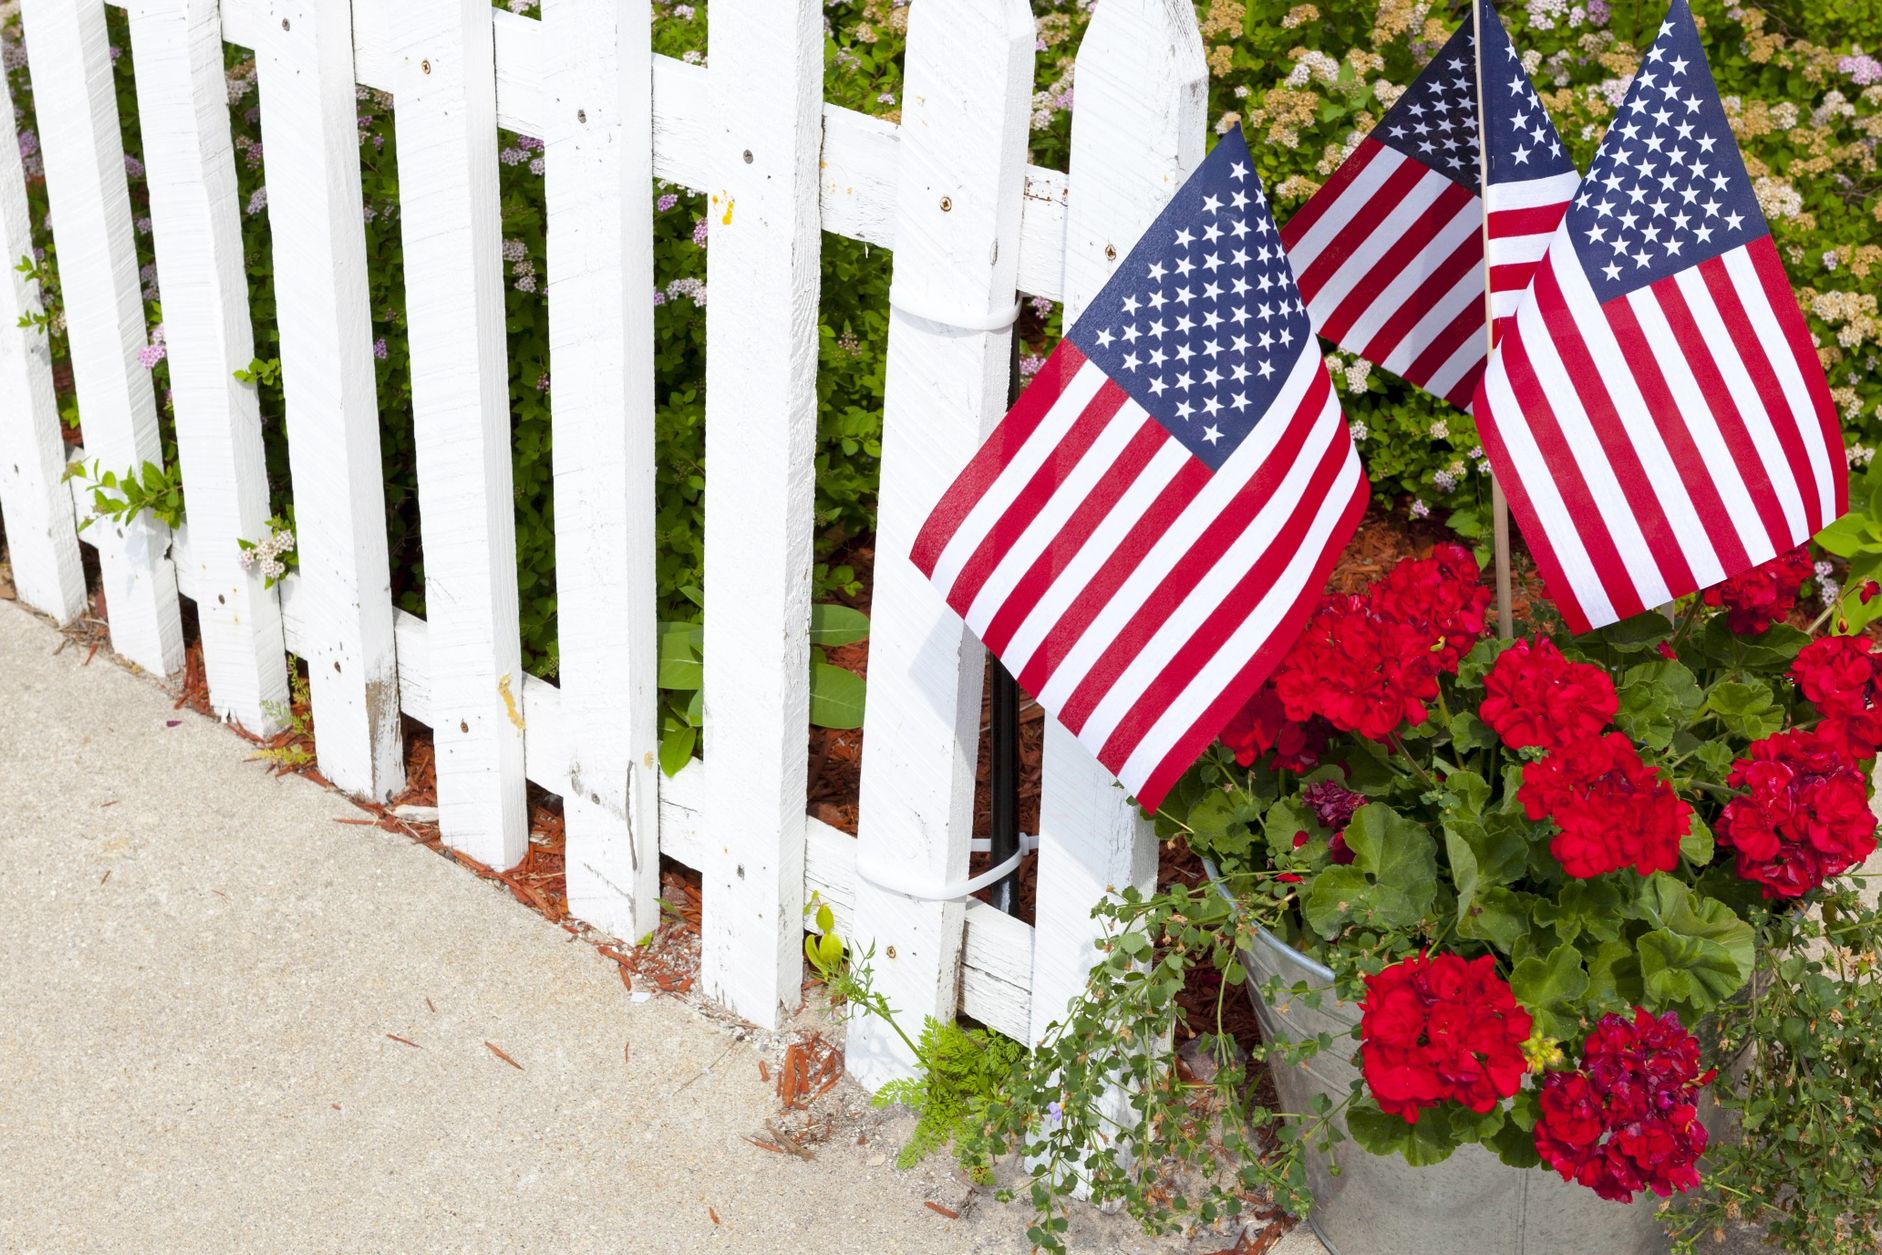 White picket fence with silver bucket holding red carnations and three American flags.